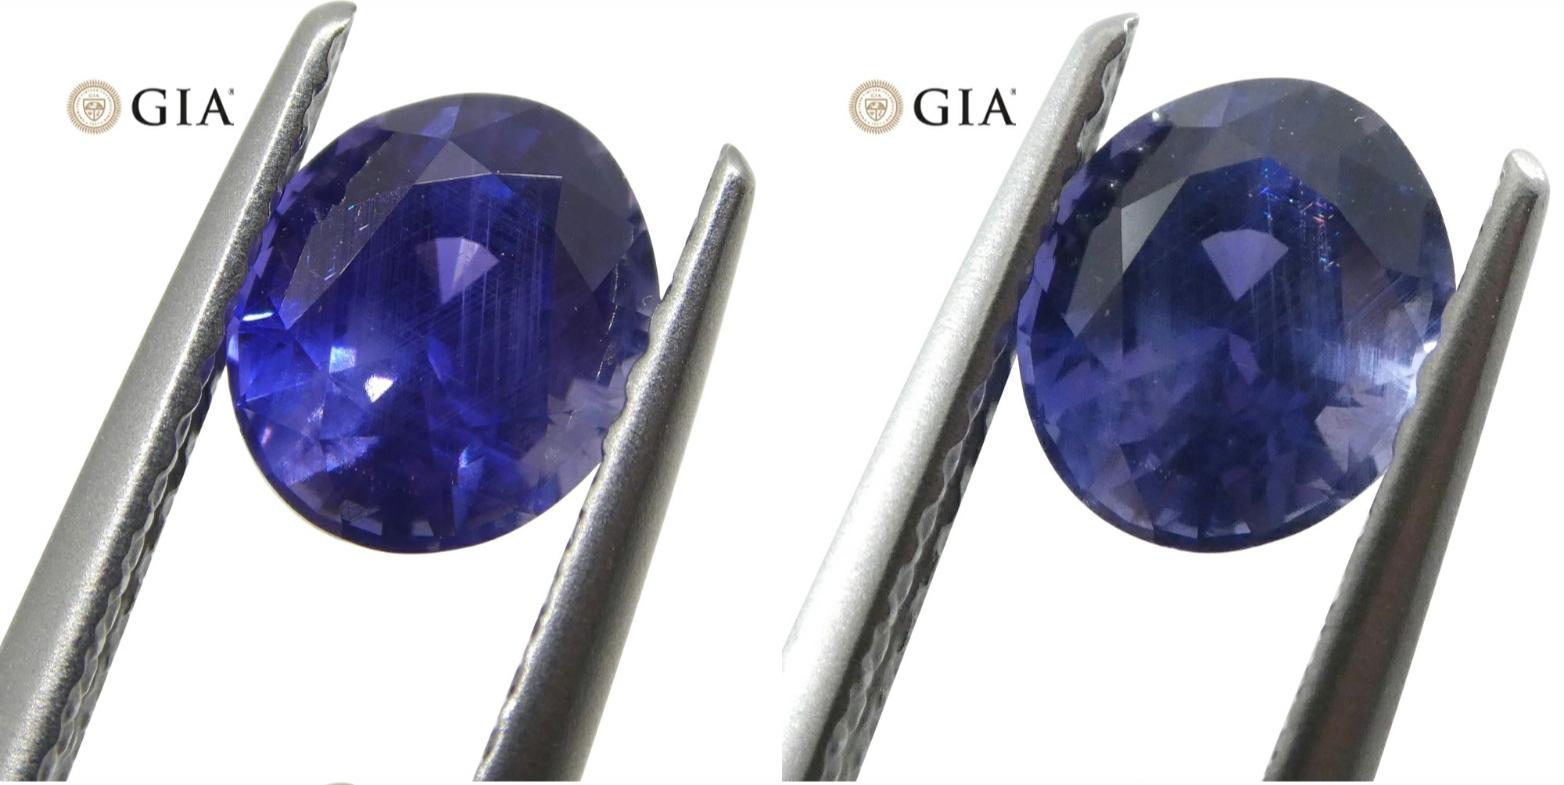 Description:



One Loose Color Change Sapphire

Report Number: 2195941916
Weight: 1.22 cts
Measurements: 6.58x5.61x4.21 mm
Shape: Oval
Cutting Style Crown: Brilliant Cut
Cutting Style Pavilion: Step Cut
Transparency: Transparent
Clarity: Very